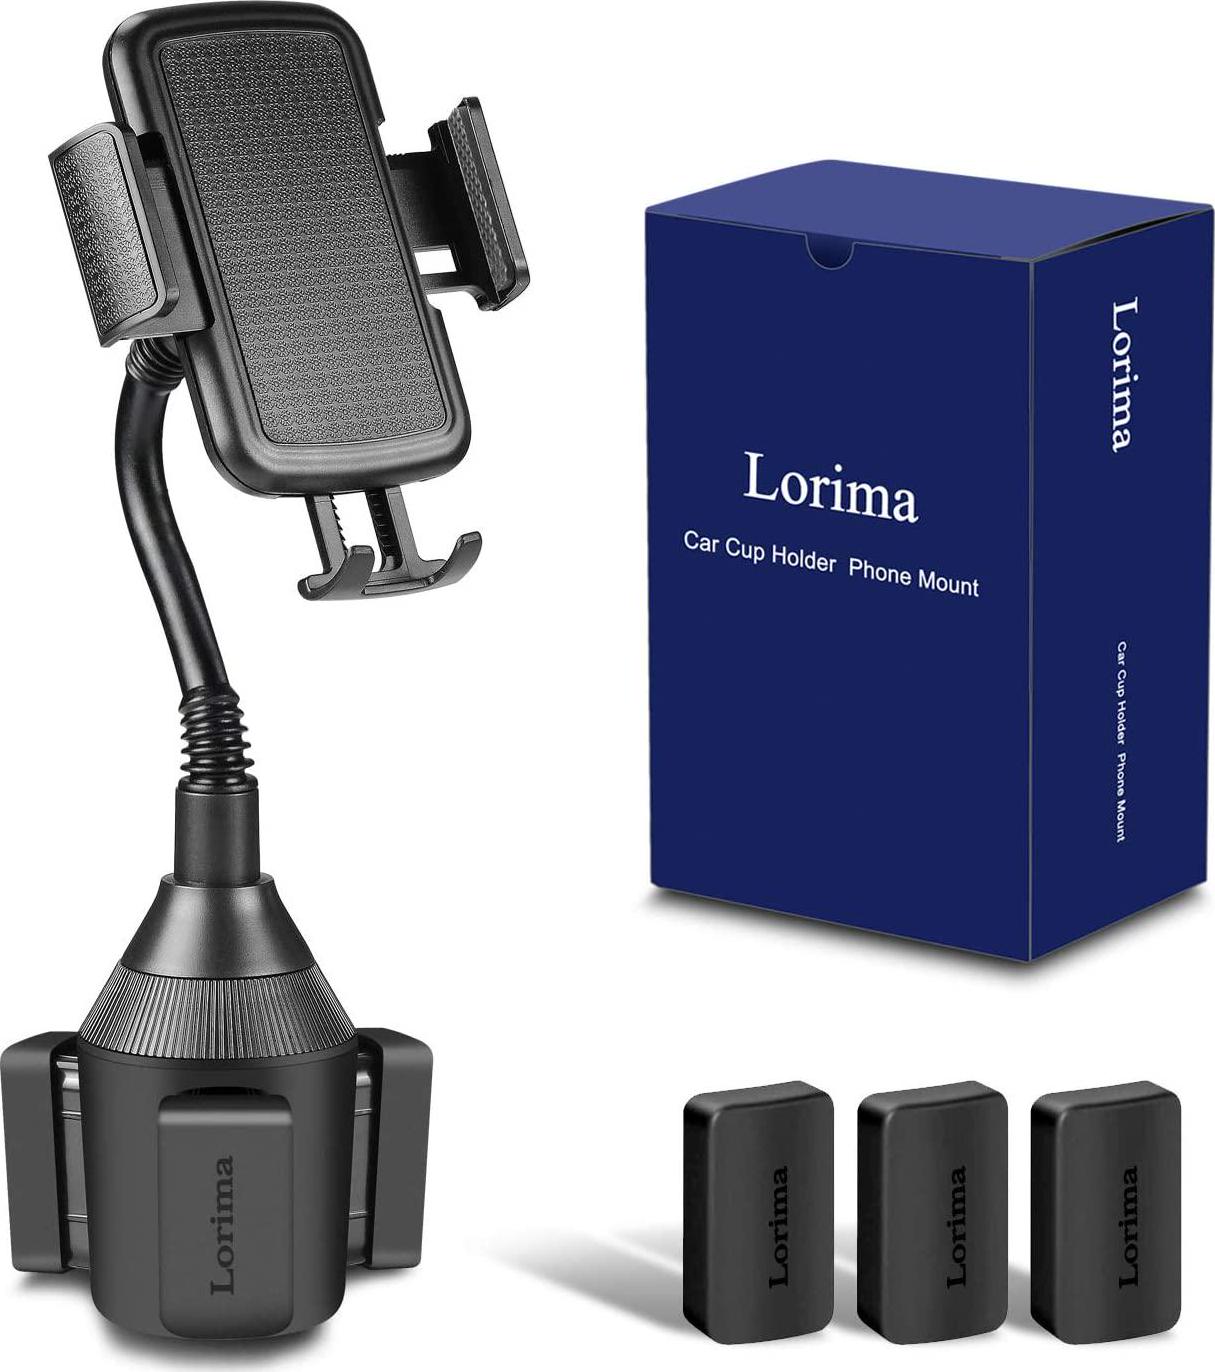 Lorima, Lorima Car Cup Holder Phone Mount with A Long Flexible Neck for Cell Phones iPhone 11/11 Pro/11 Pro Max/XS/Max/X/8/7 Plus/Galaxy